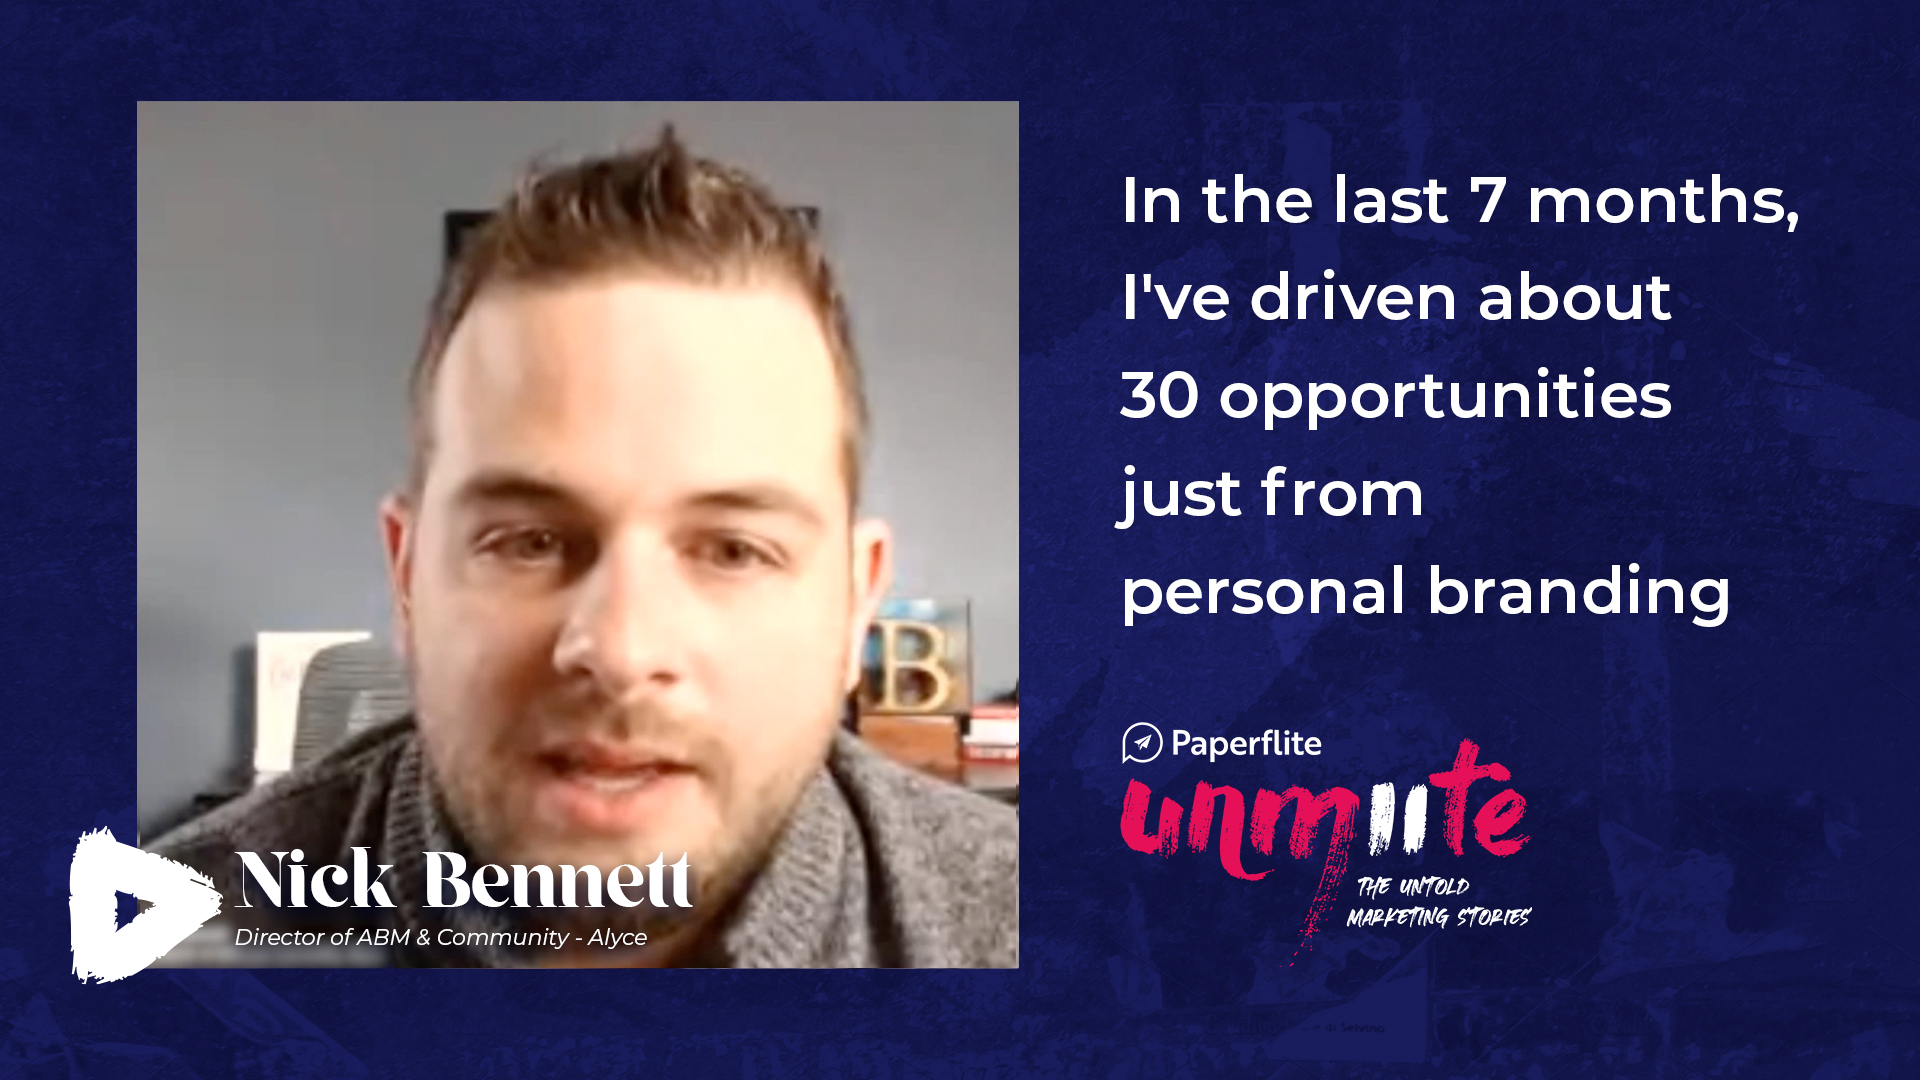 Nick Bennett on personal branding at Paperflite UNMUTE 2021 - personal branding helps elevate careers and drives inbound opportunities